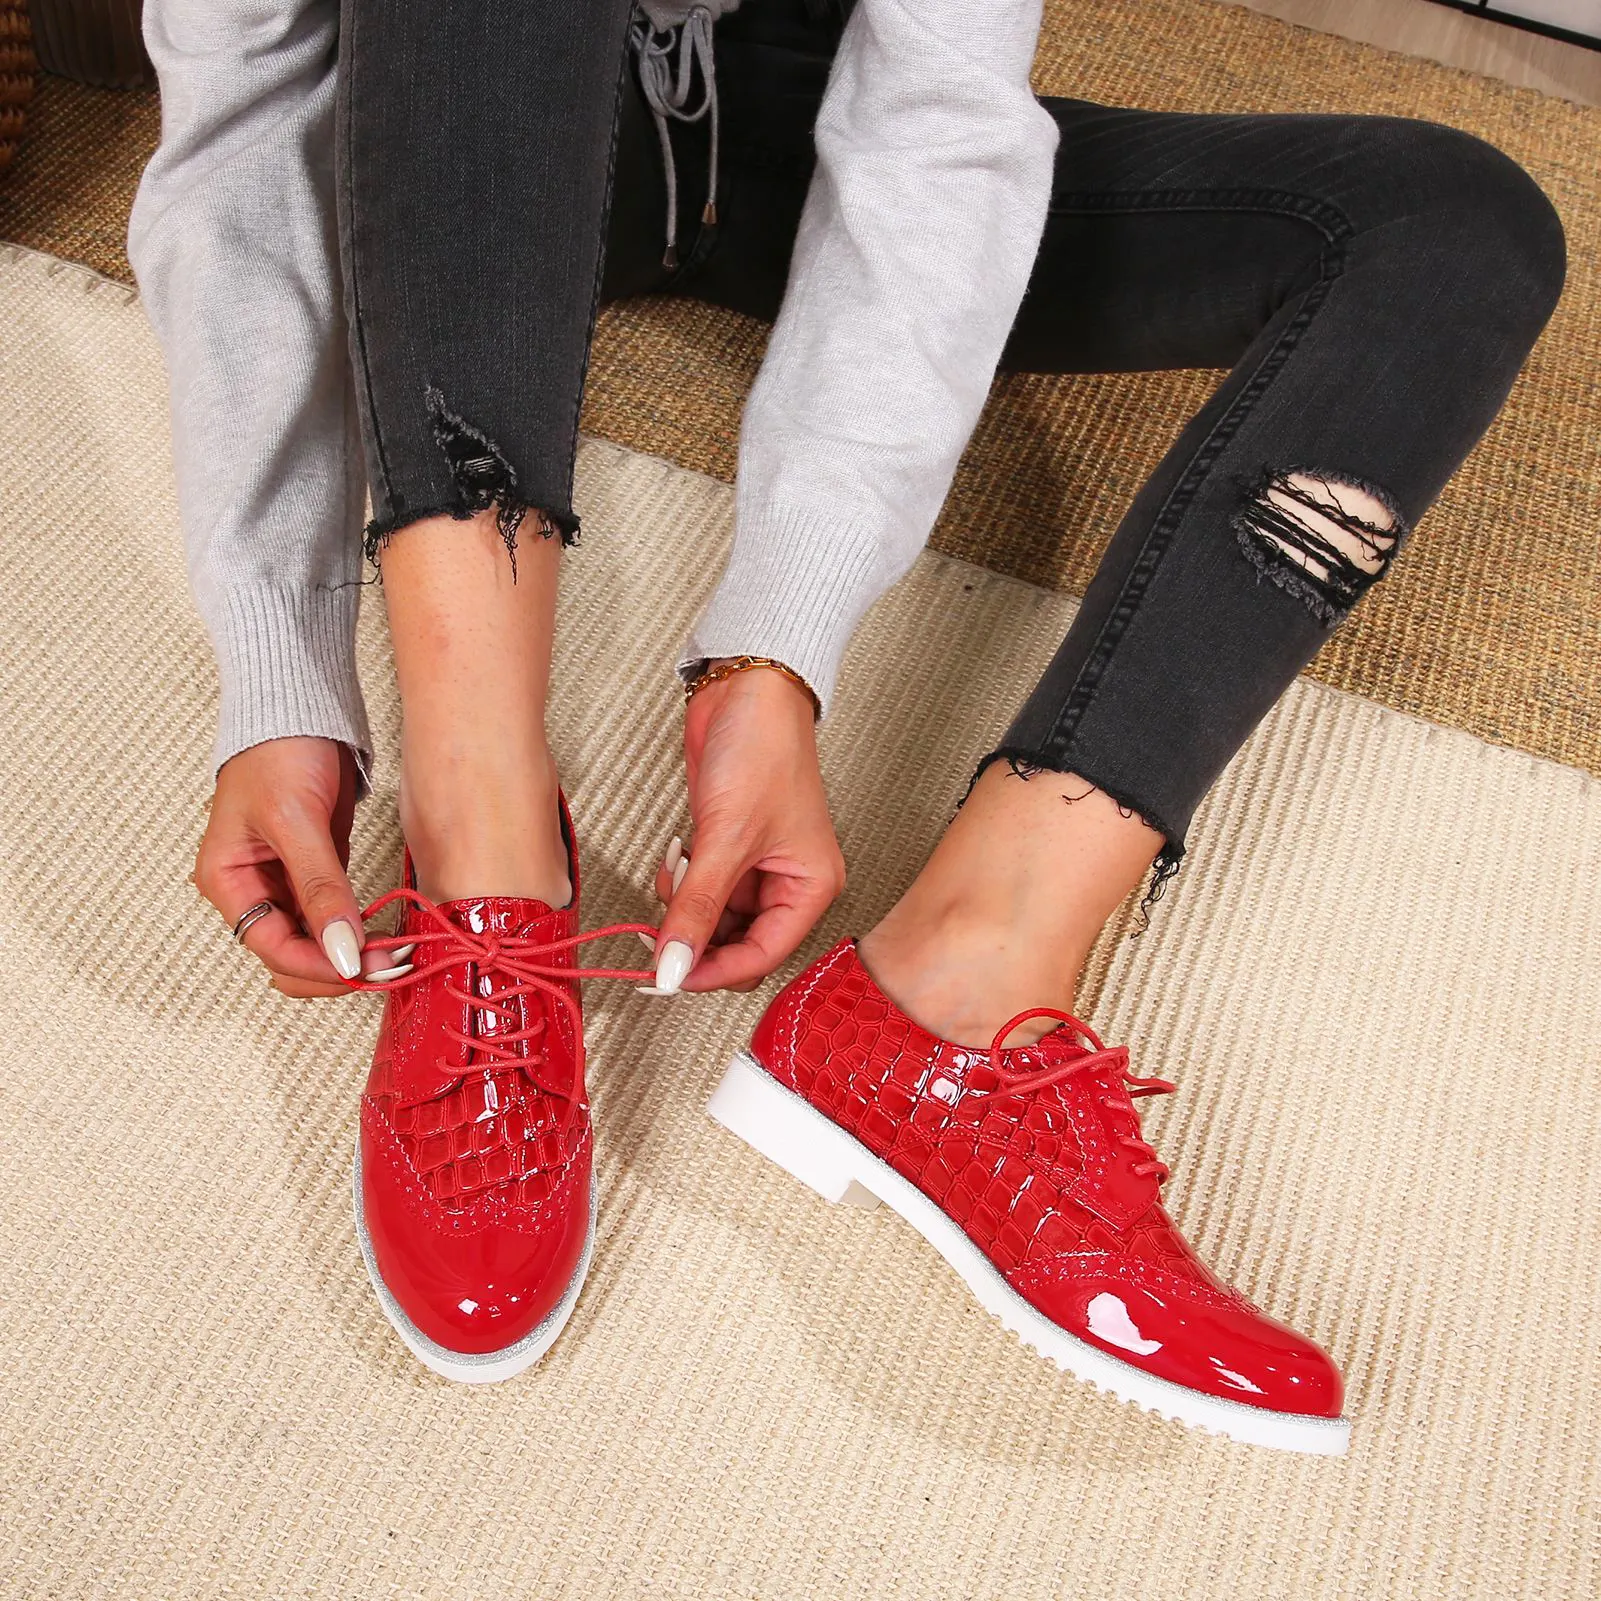 Hot sale oxfords flat shoes lace up casual crocodile print shoes for women